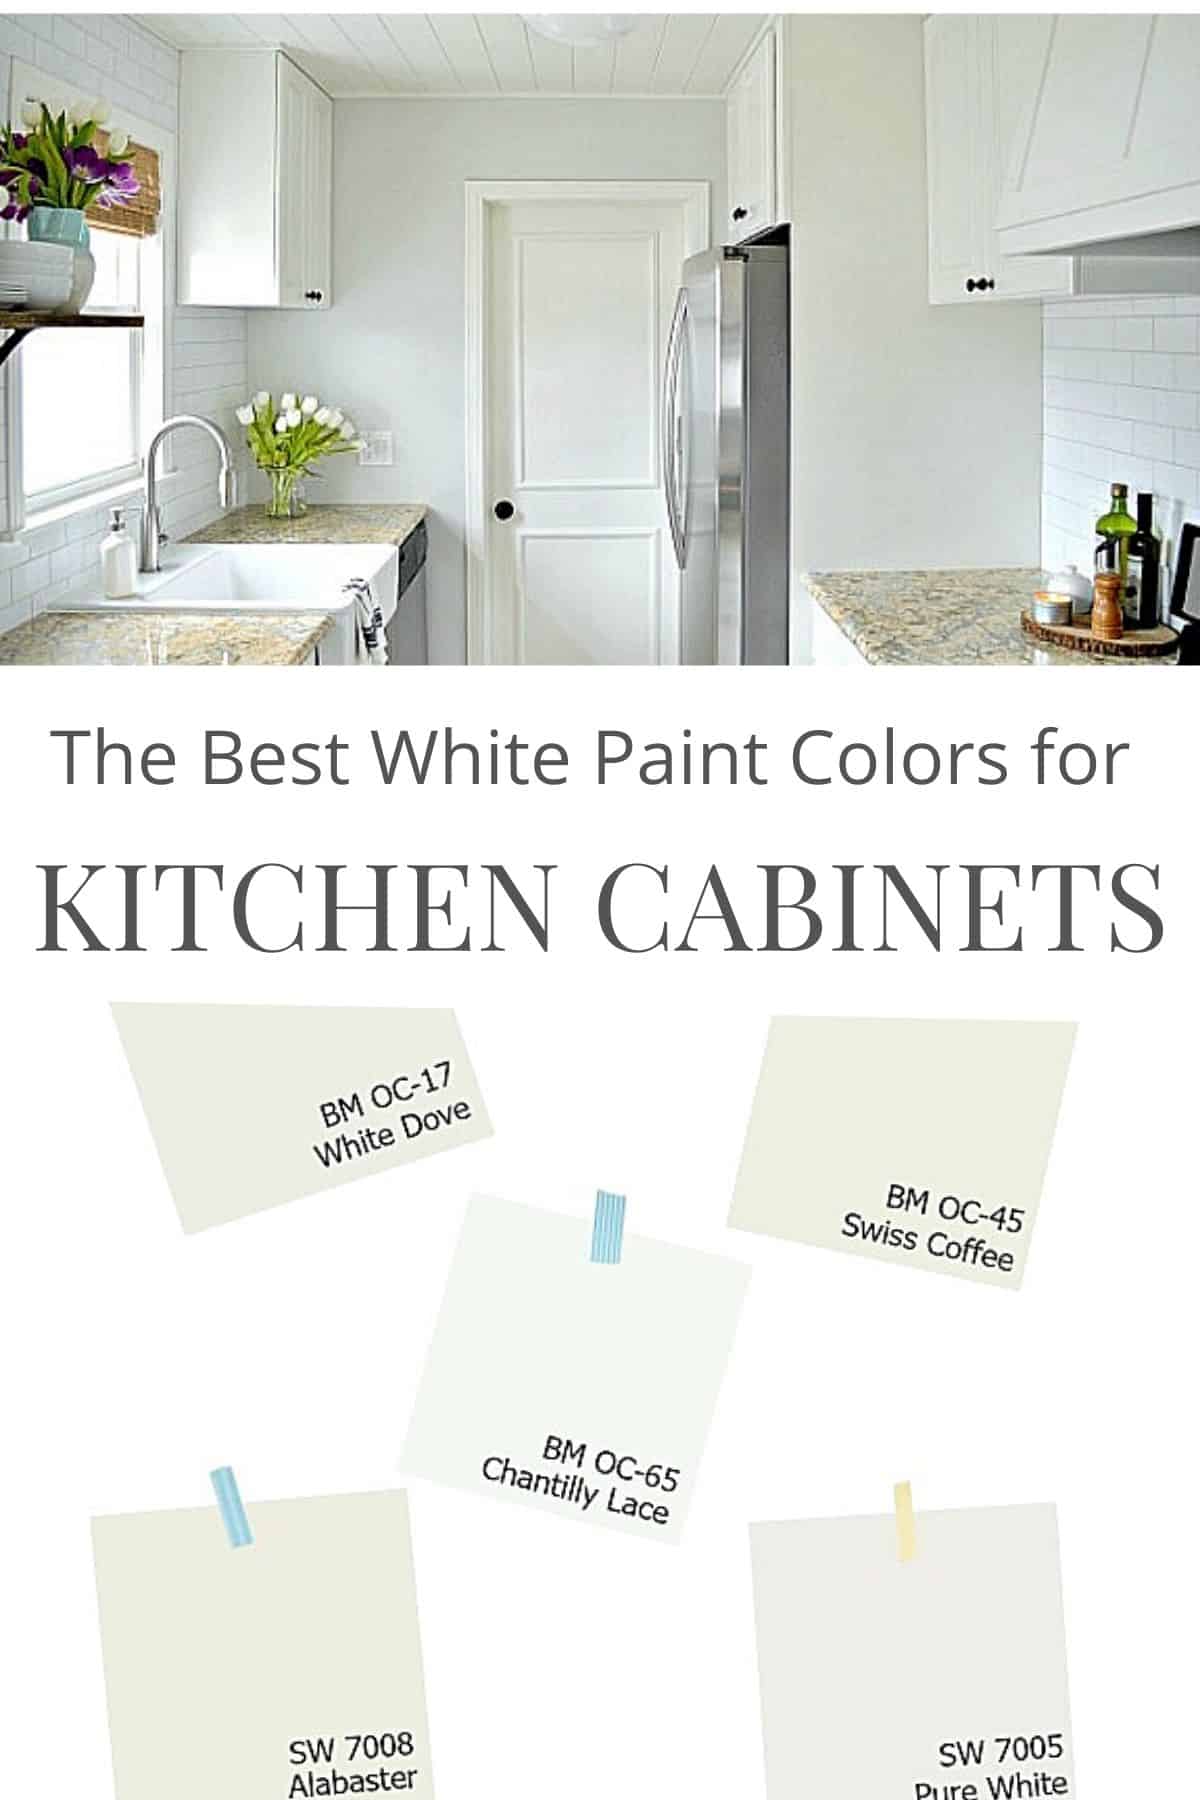 Choosing The Best White Paint Color For Your Kitchen Cabinets - What Is A Good White Paint Color For Kitchen Cabinets